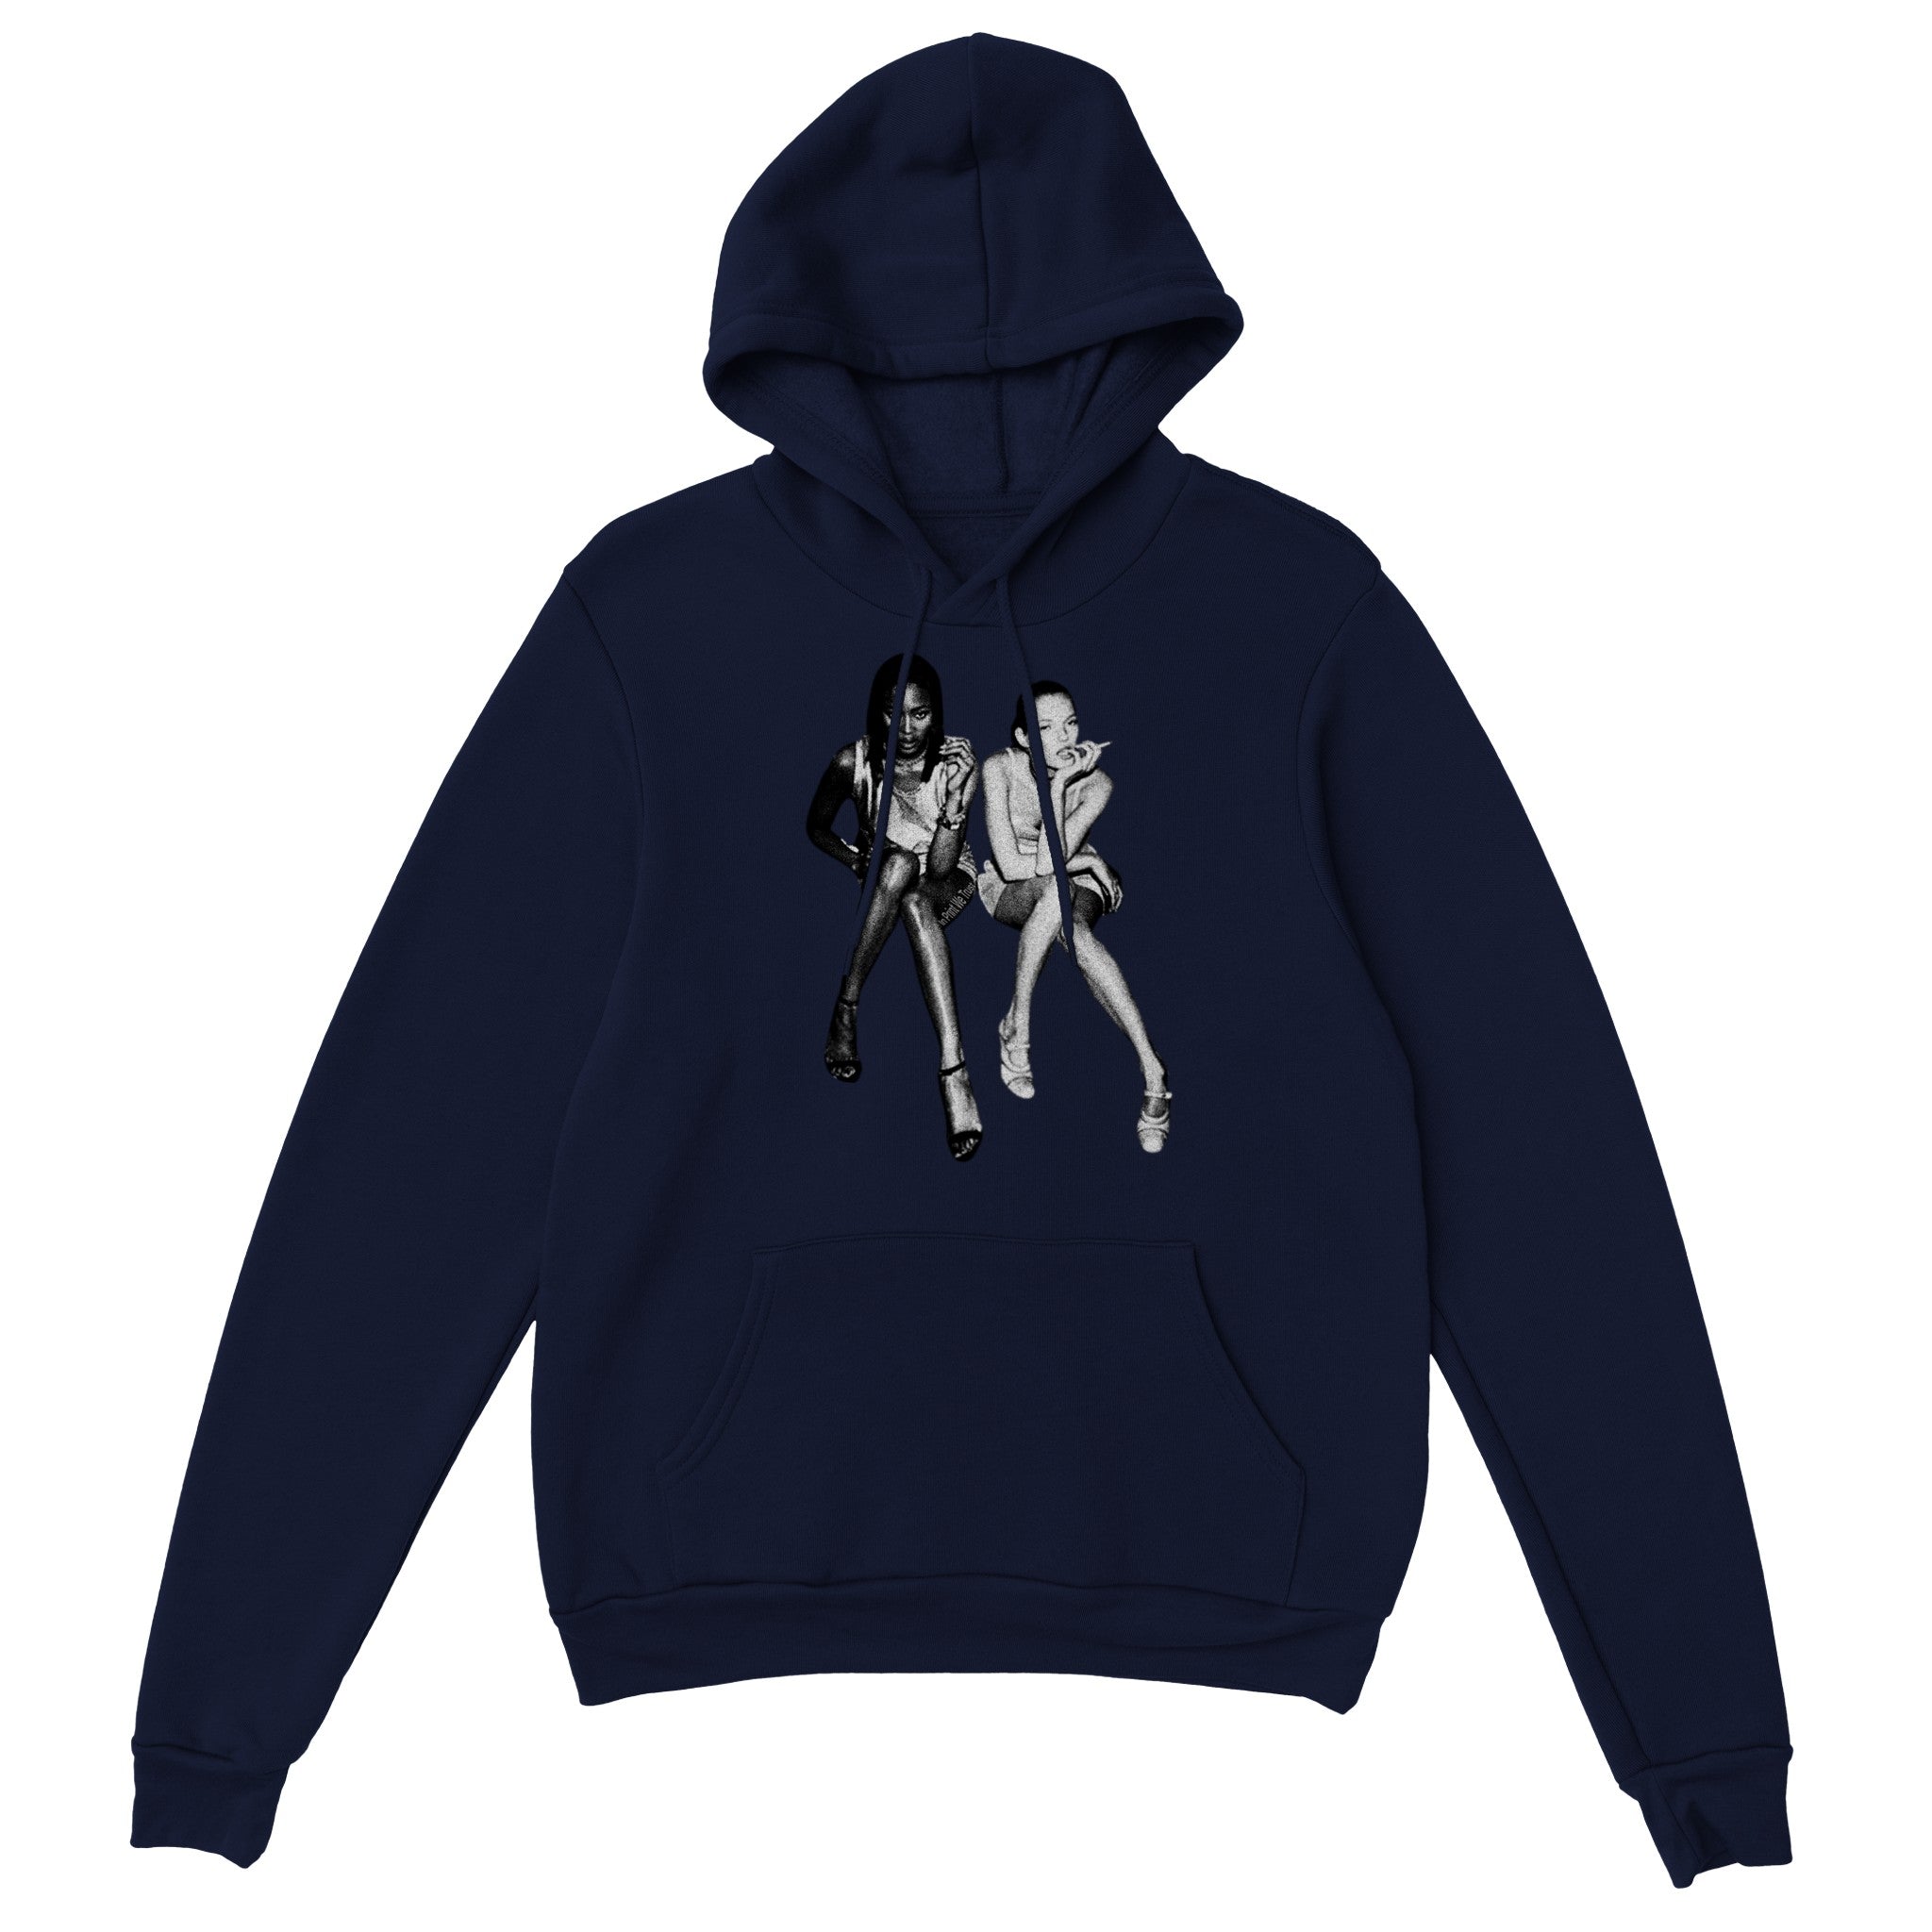 After Party' hoodie